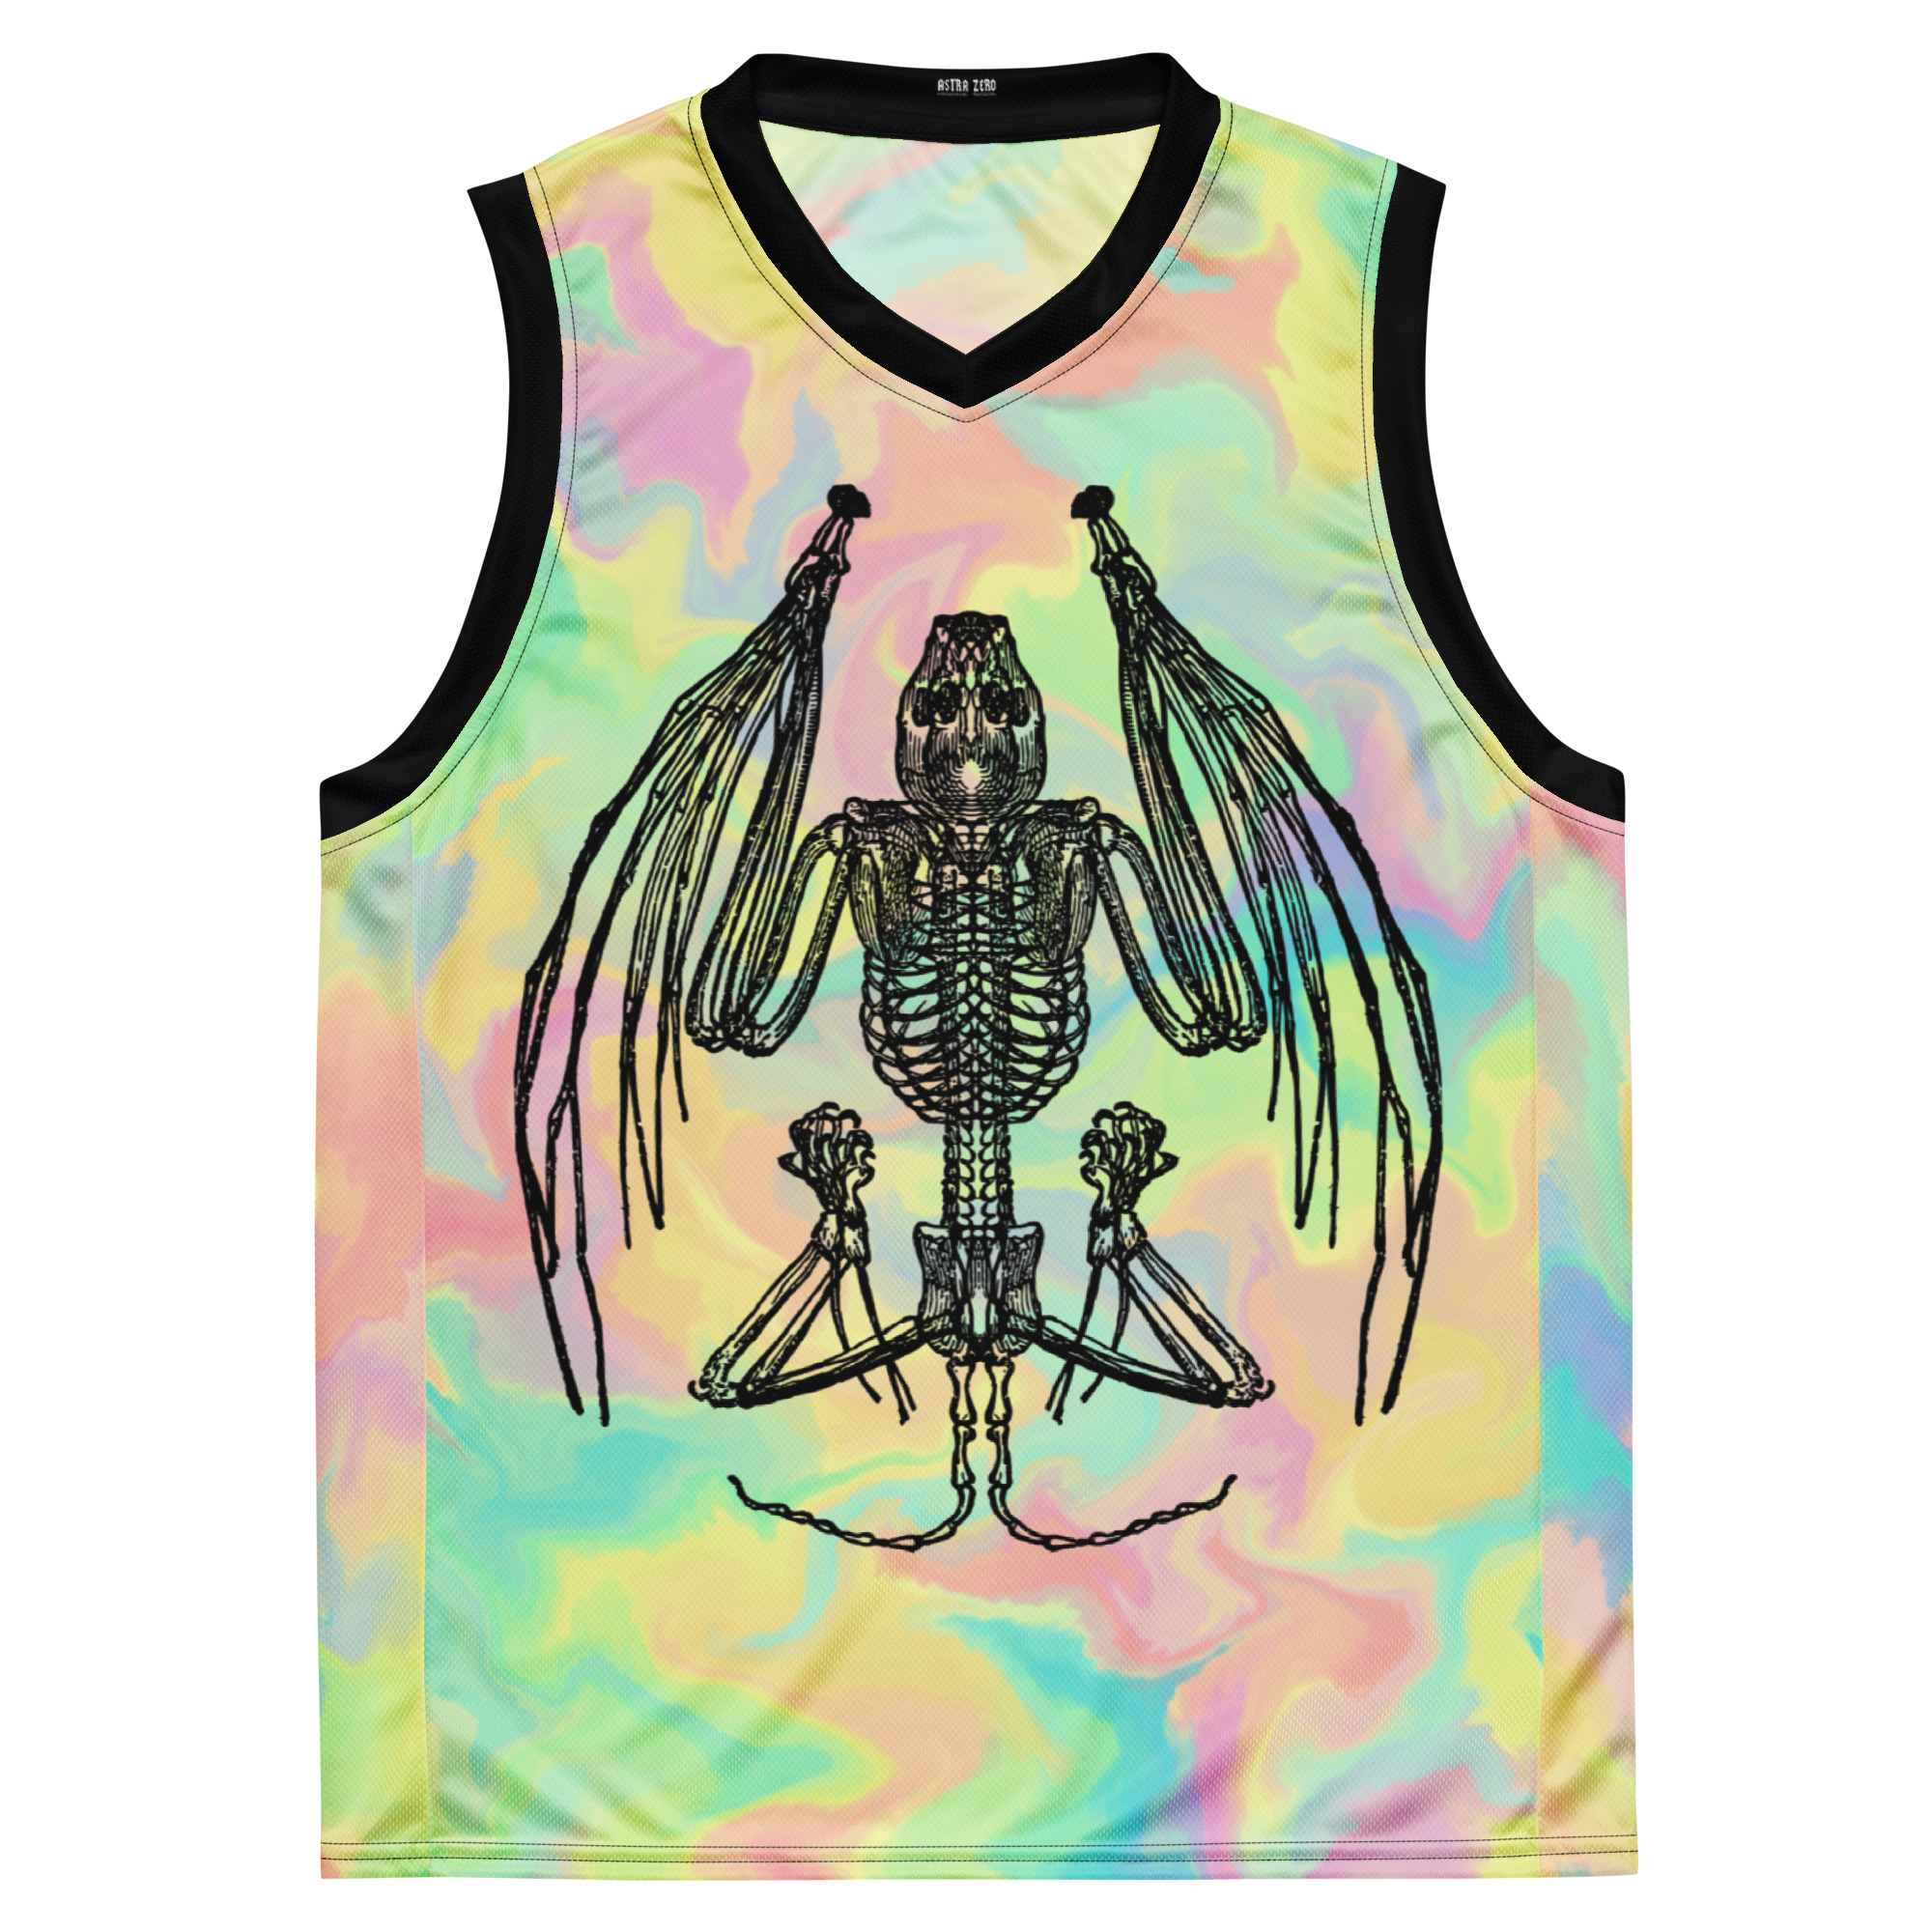 Featured image for “Bat Skeleton Pastel Yellow Rainbow - Recycled unisex basketball jersey”